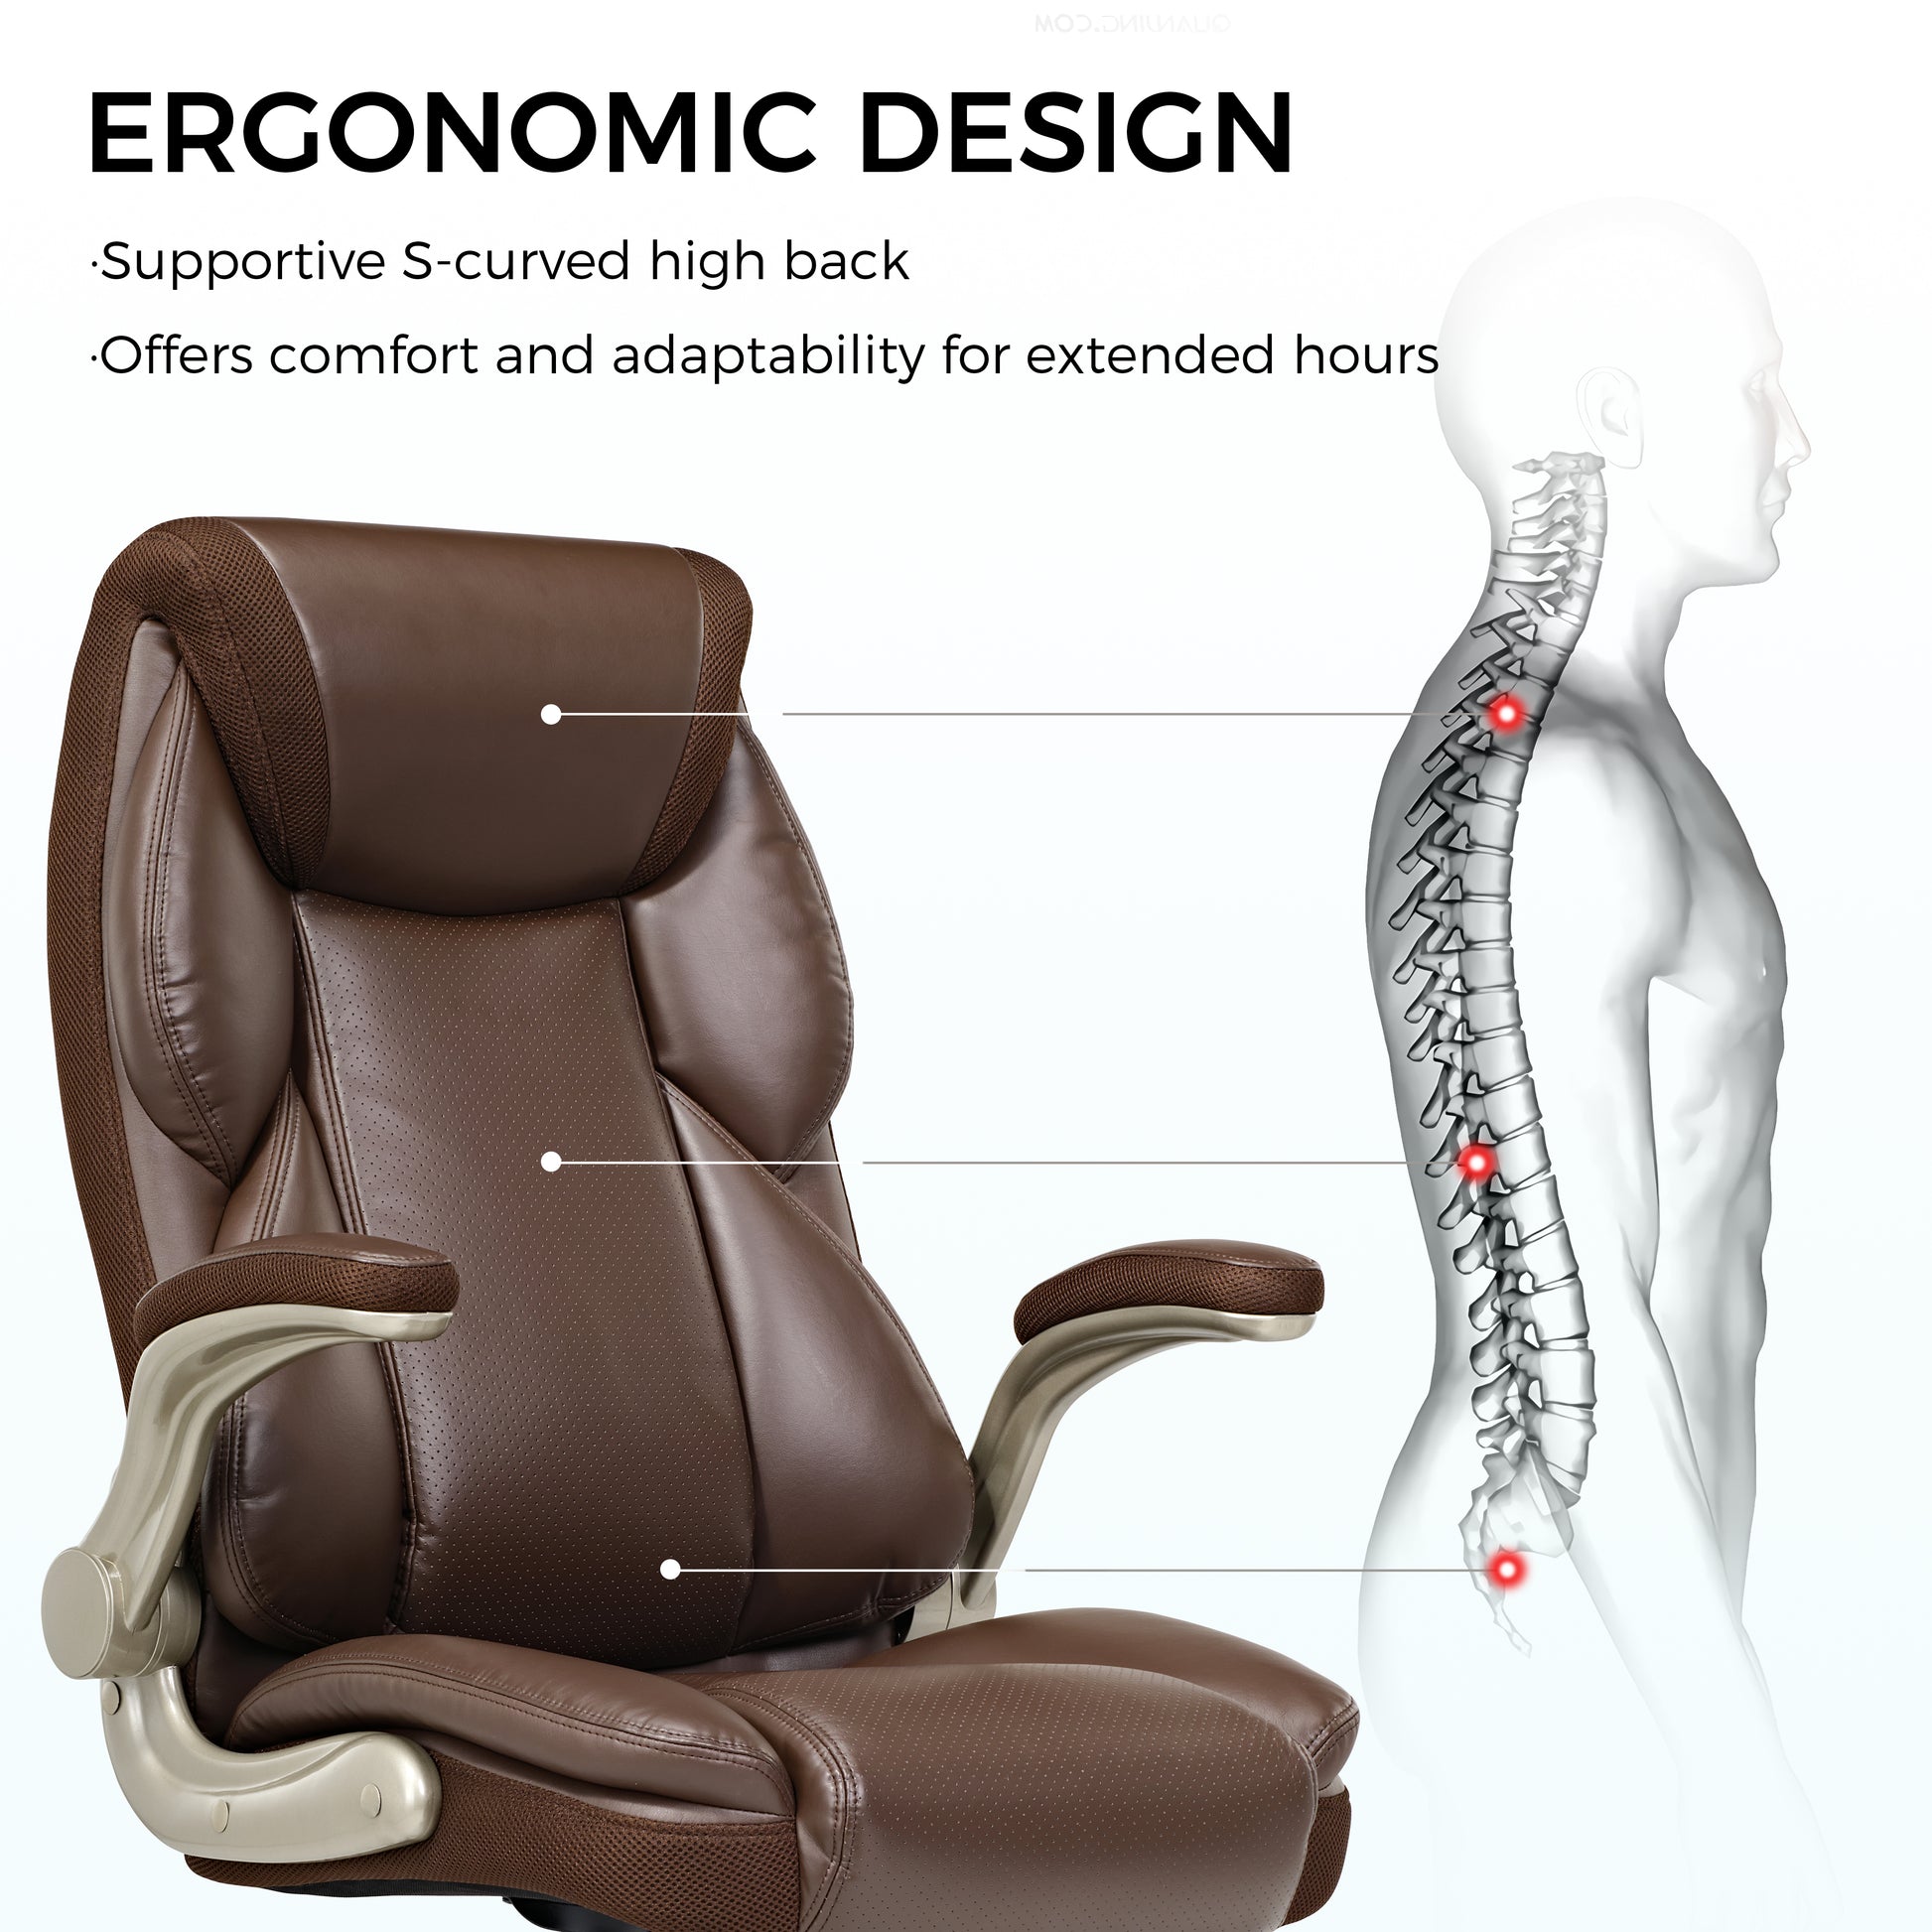 Galene, Home Office Chair, Brown, Breathable cushioned PU Leather Fabric, Ergonomic Design, Supportive S-curved high back, Offers comfort and adaptability for extended hours